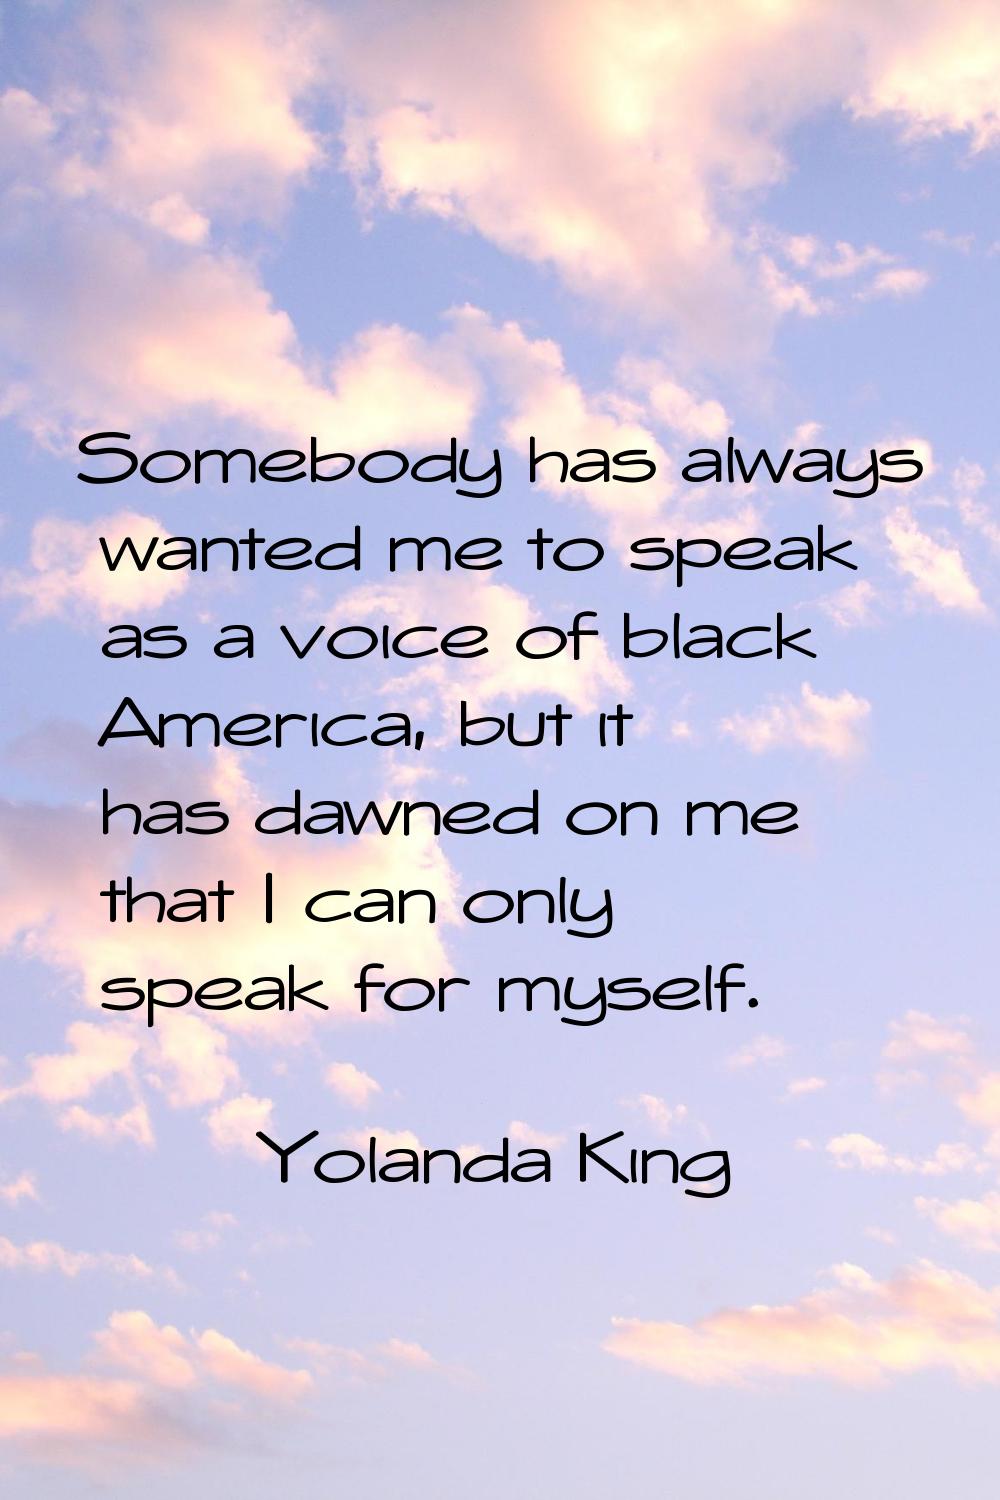 Somebody has always wanted me to speak as a voice of black America, but it has dawned on me that I 